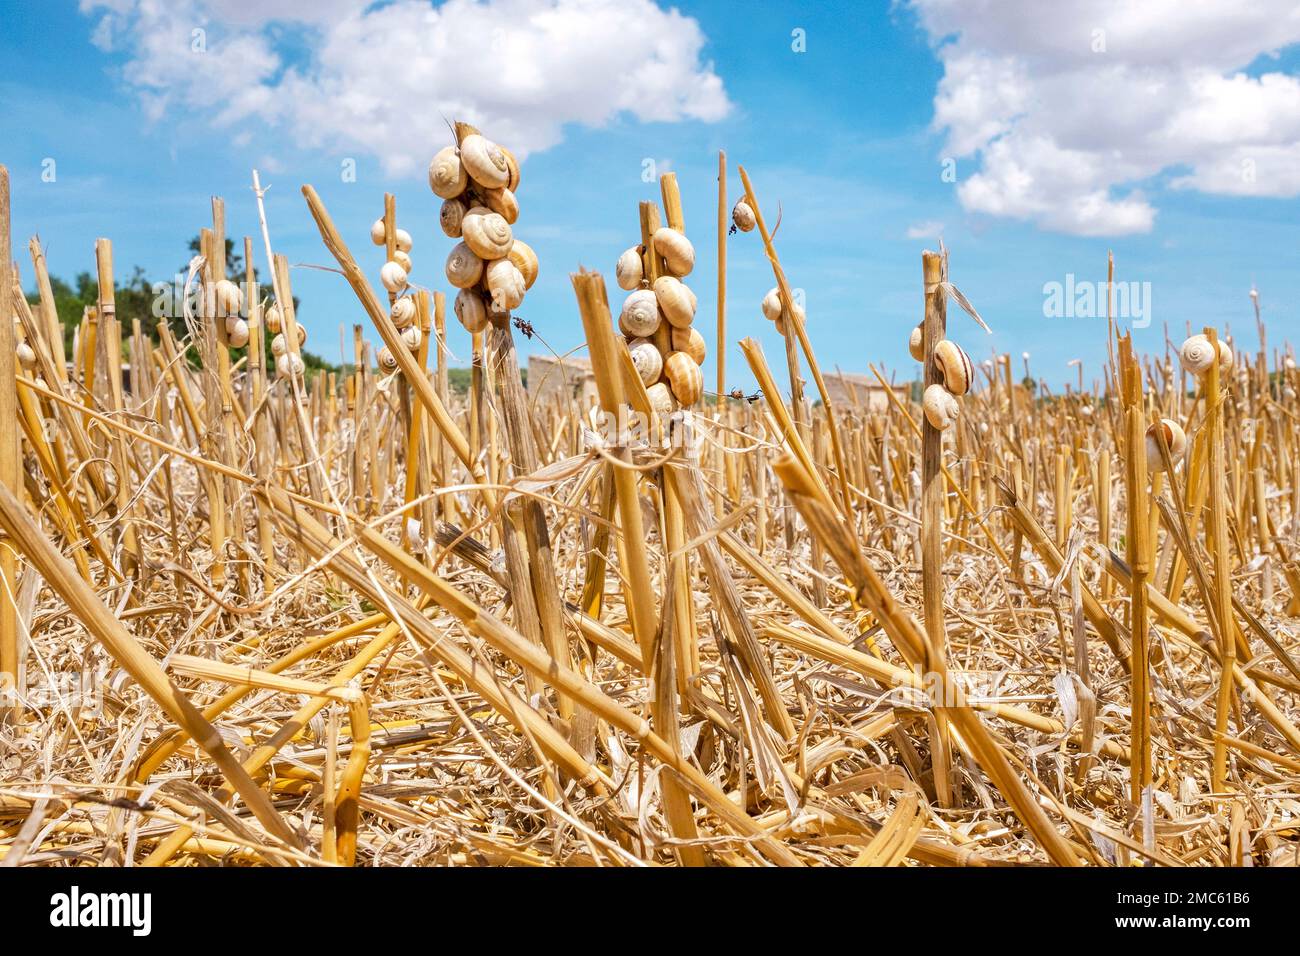 Snails on a harvested field Stock Photo